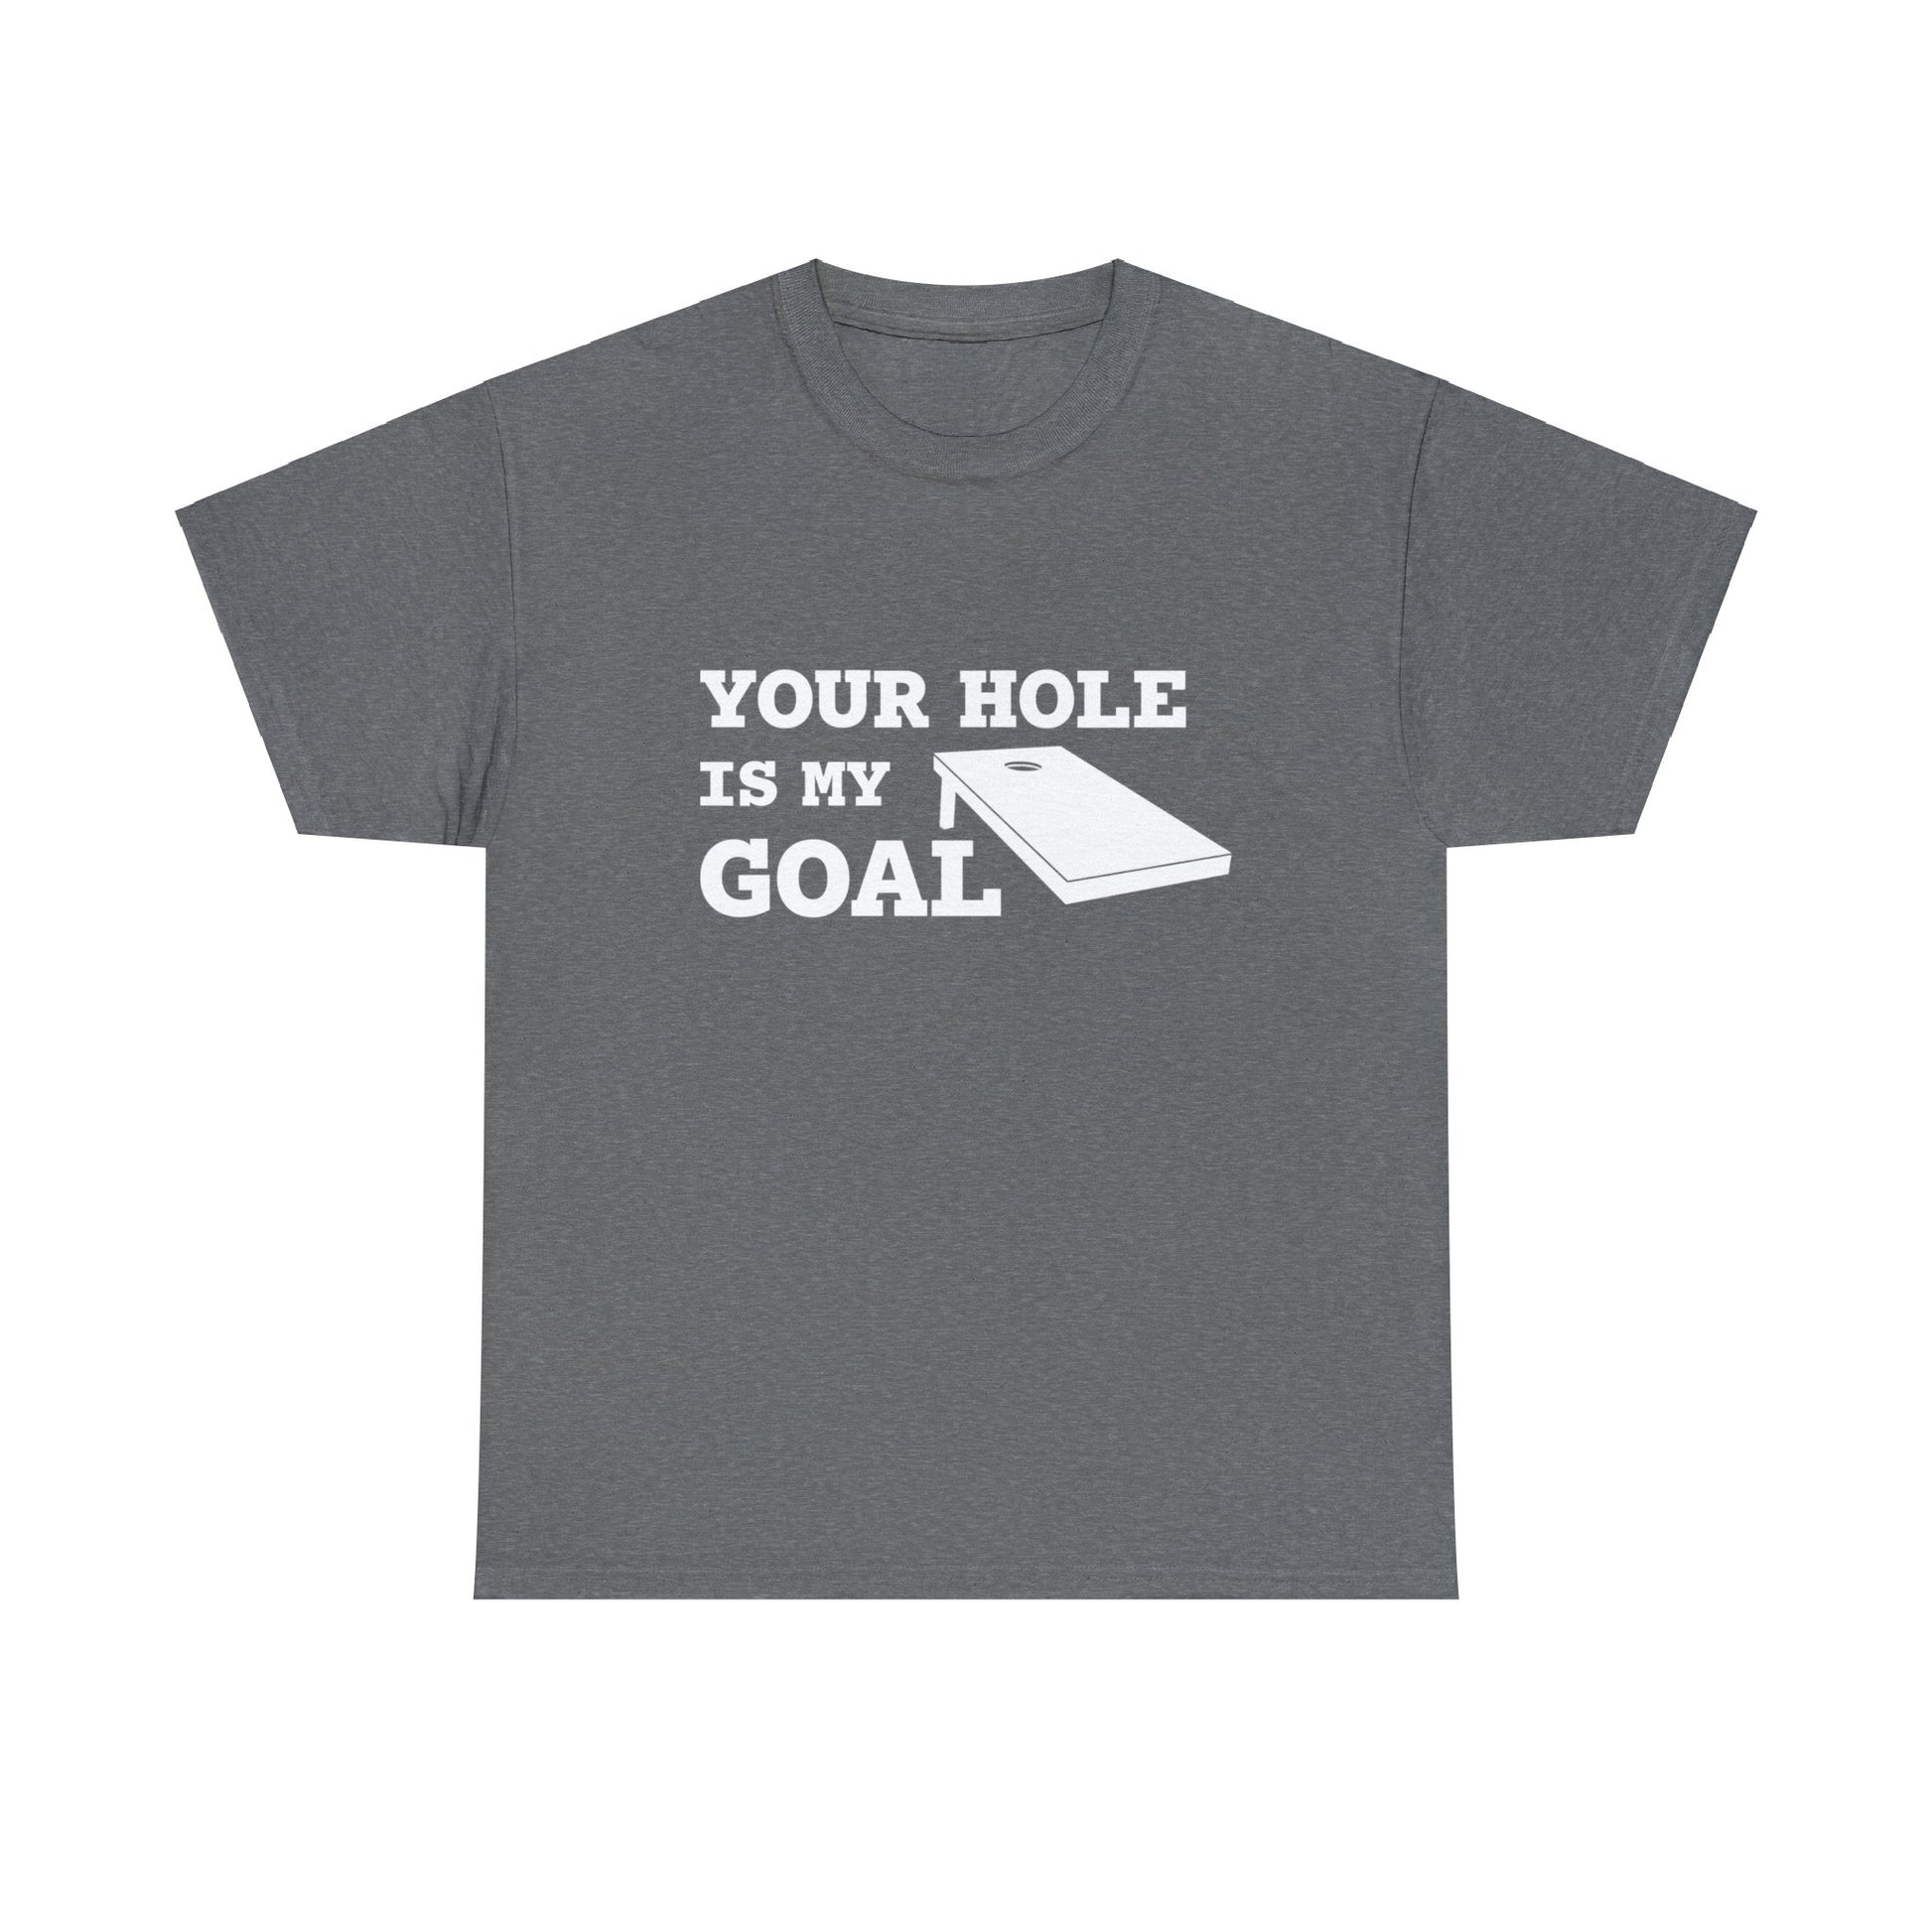 your hole is my goal tshirt